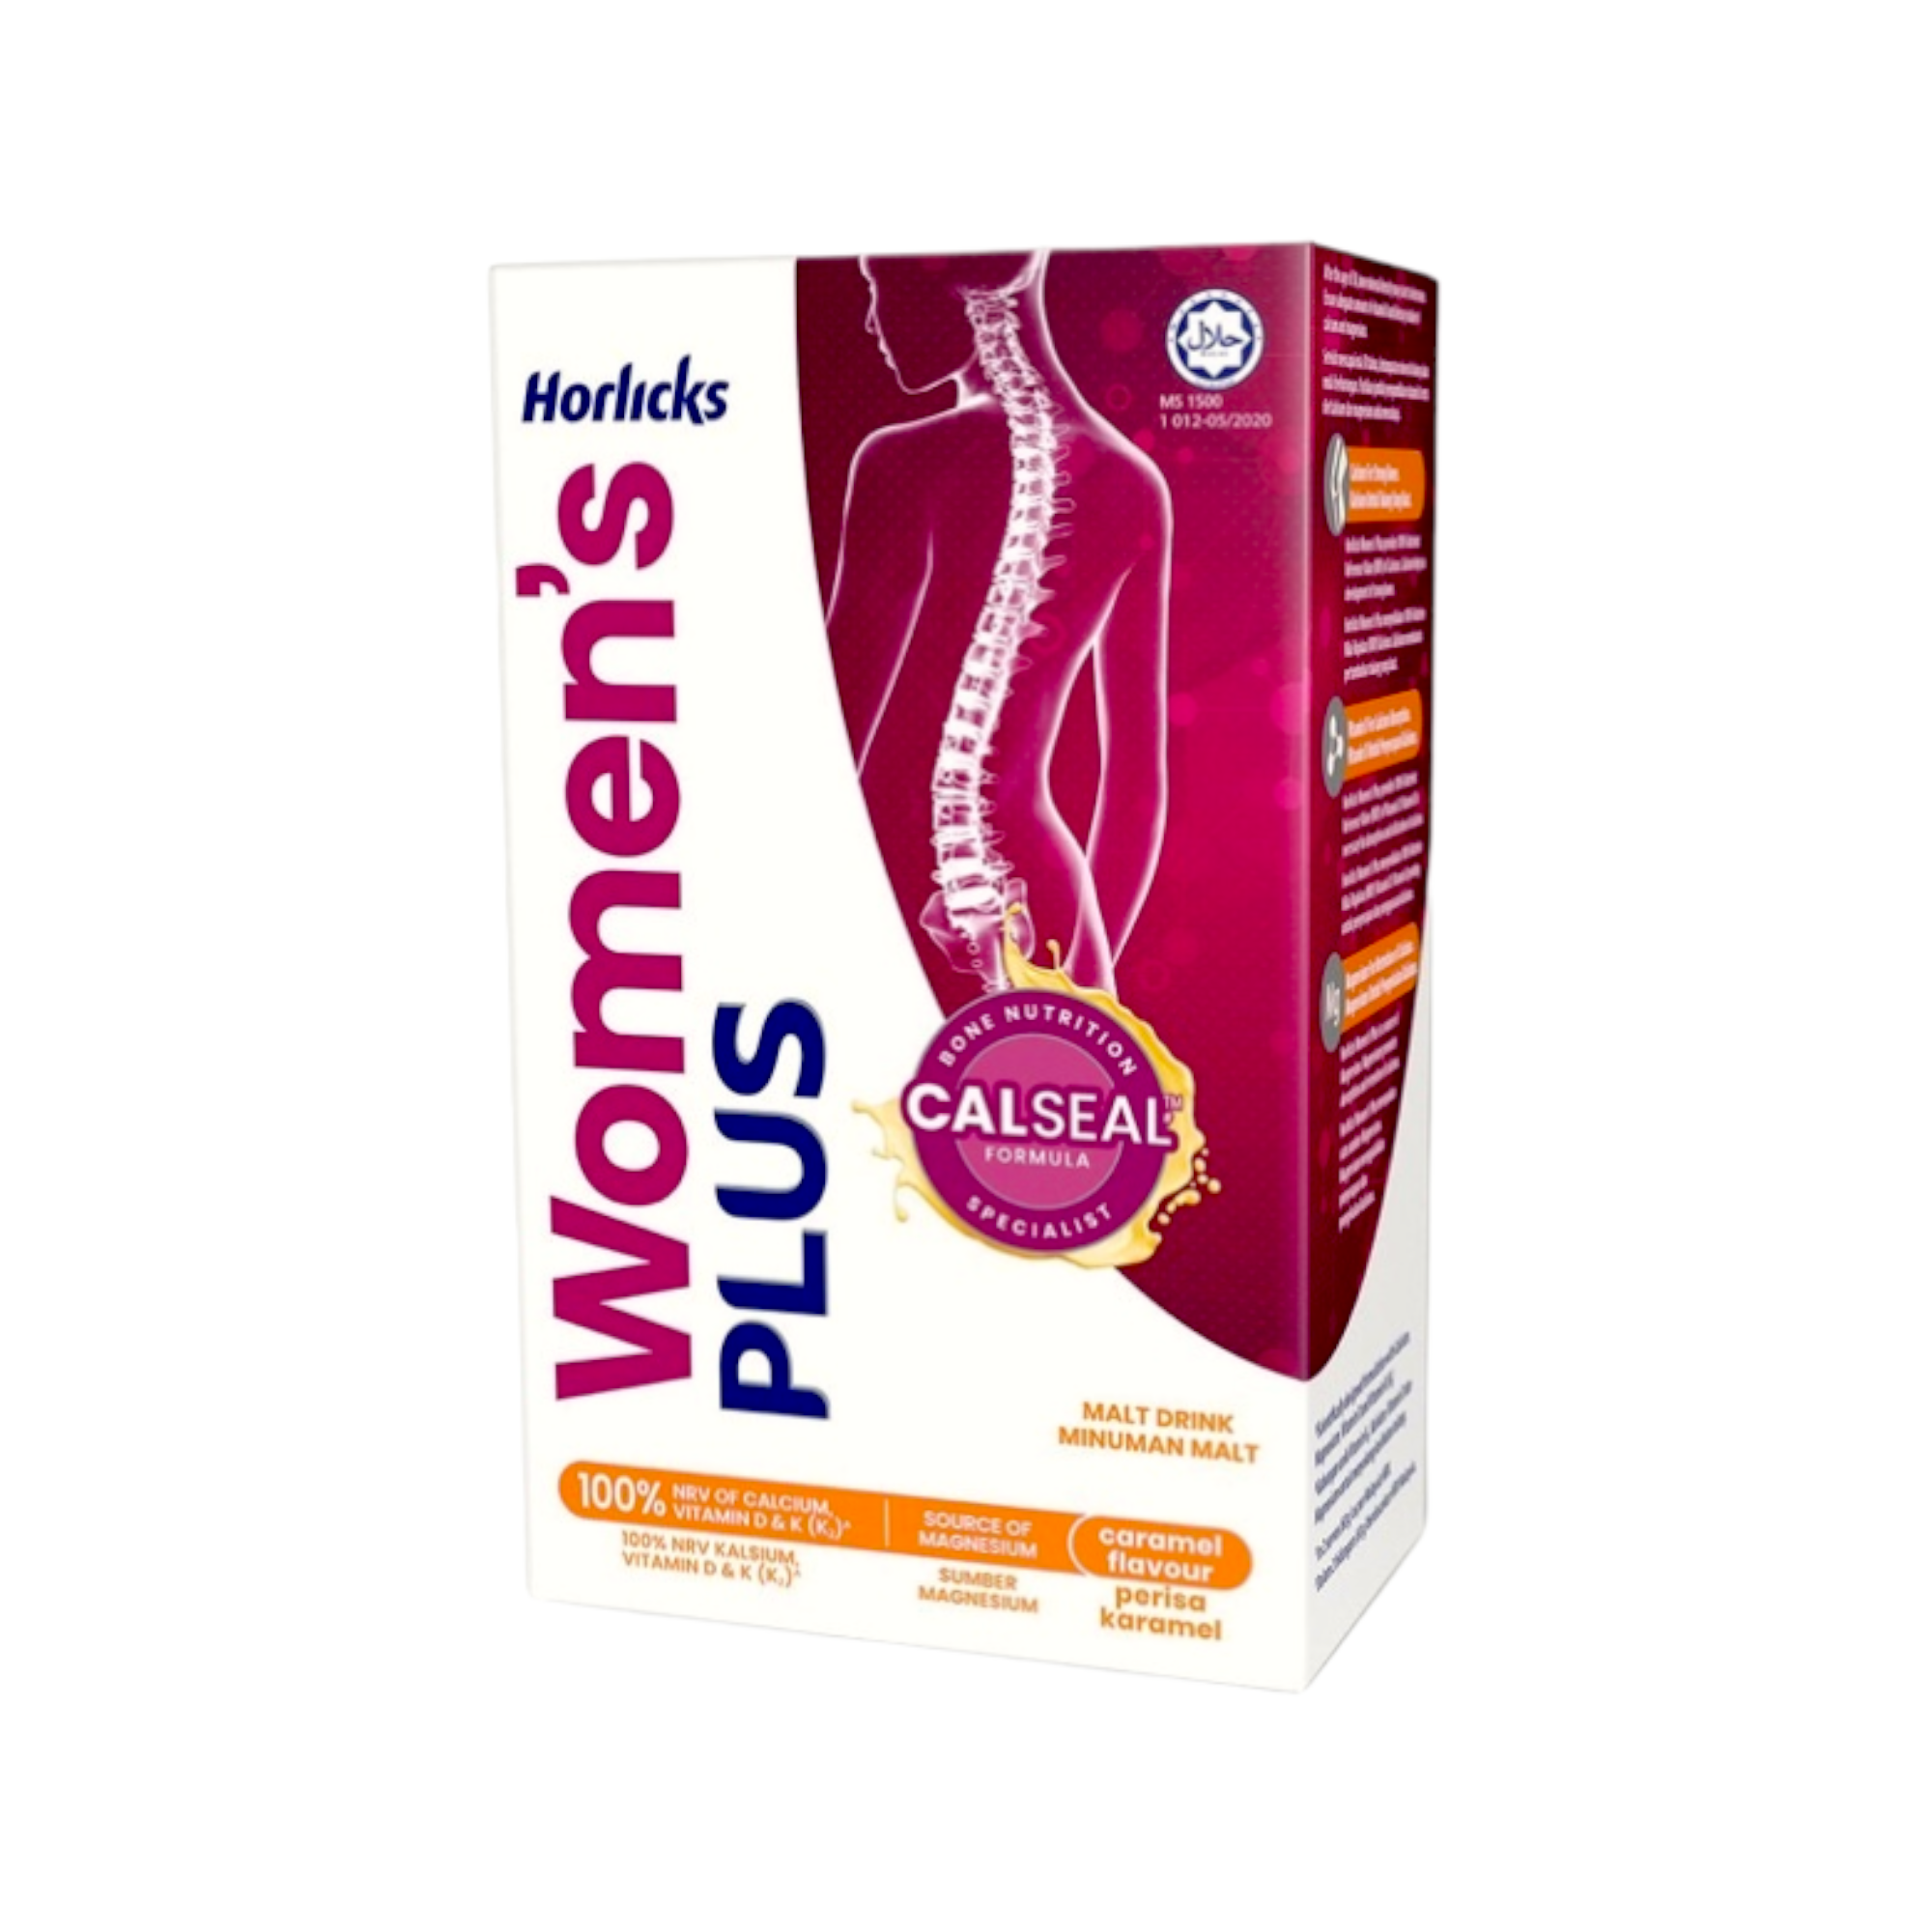 New Horlicks Women's Plus Review, Healthy And Nutritional